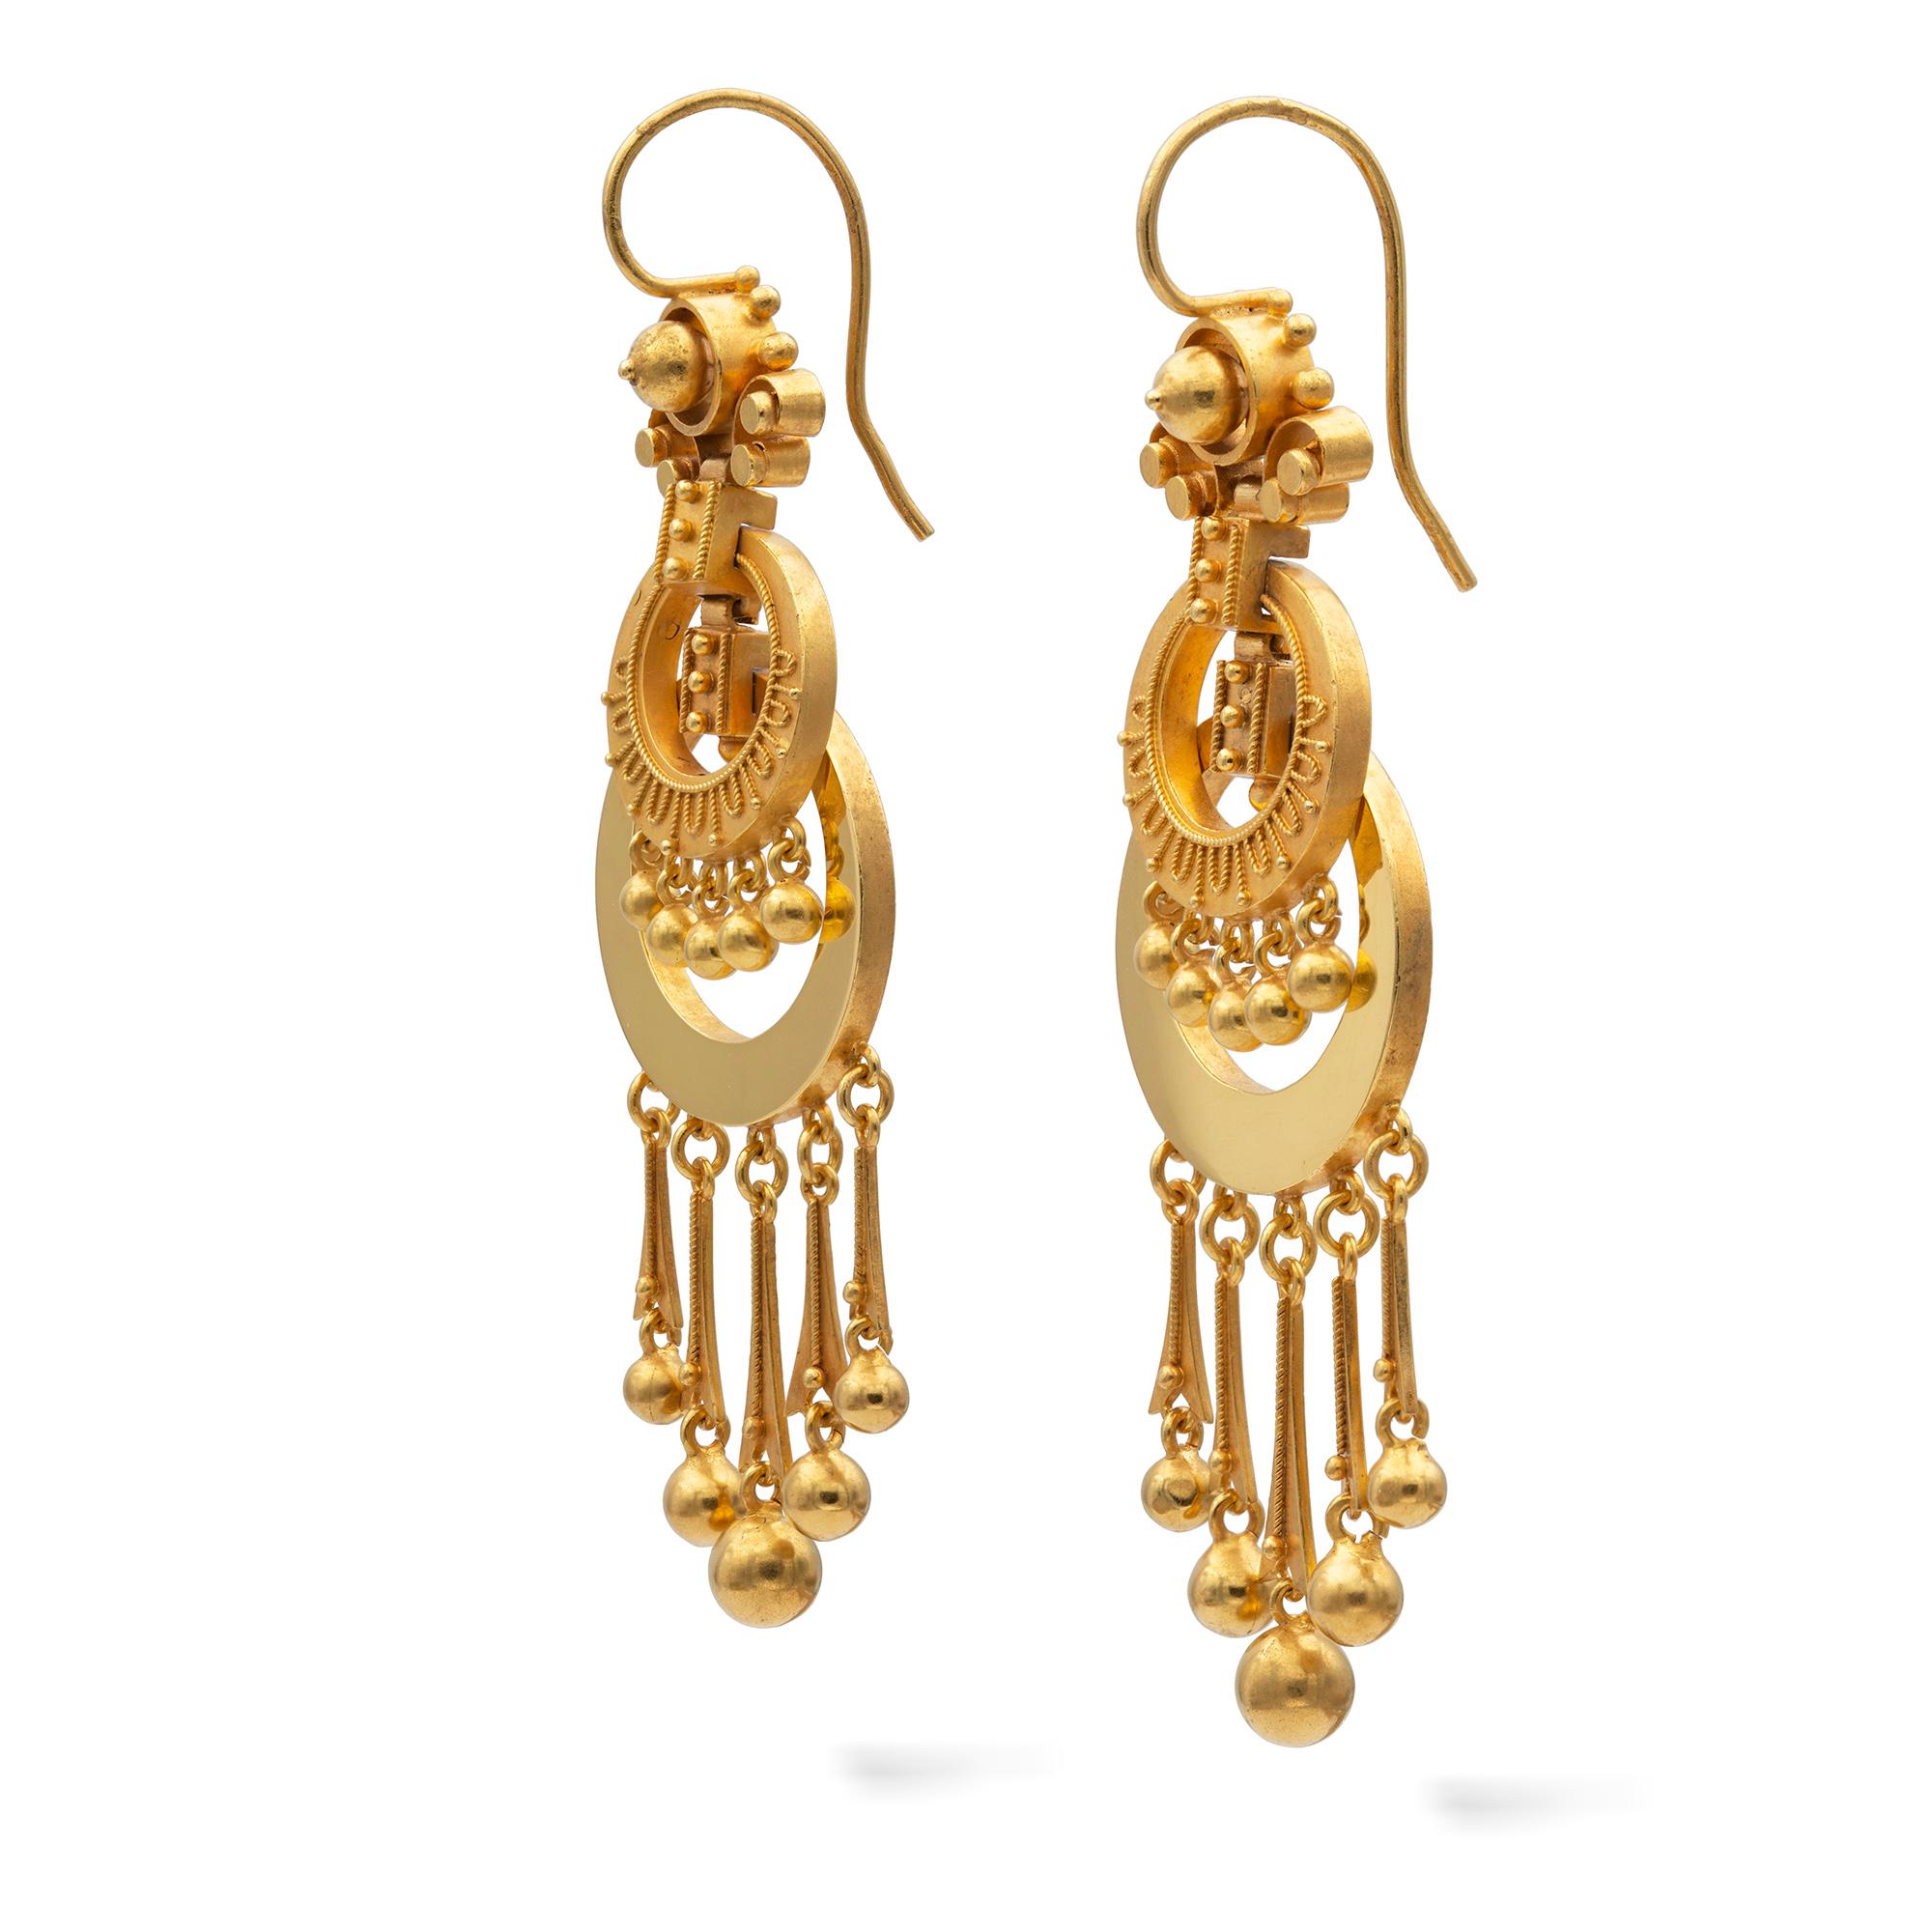 A pair of Victorian gold drop earrings, consisted of two circlets each with five gold drops, all suspended by scroll designed openwork top, with shepherds hook fitting, all in yellow gold,  circa 1870, measuring approximately 6.8 x 2.1cm, gross